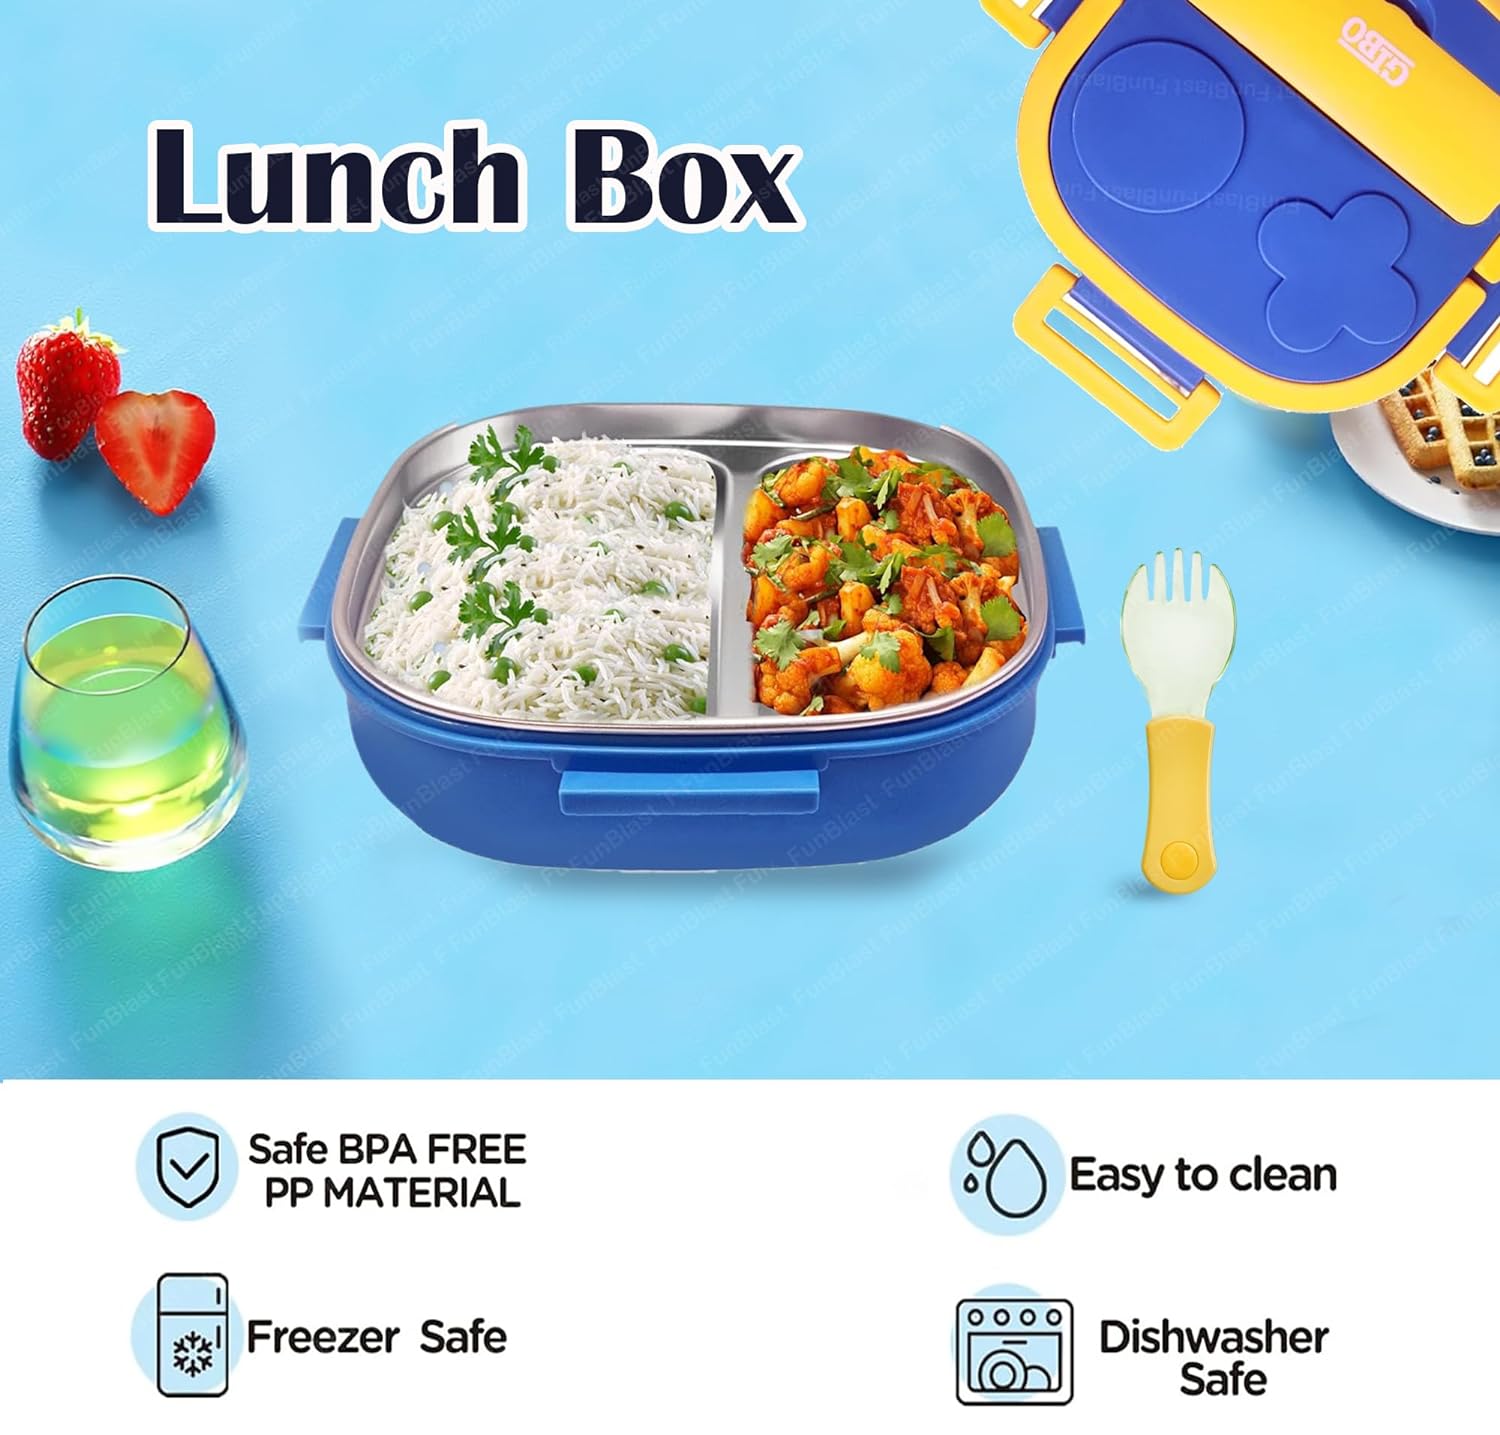 Lunch Box for School Kids, Compartment Lunch Box with Stainless Steel Inner Case, SUS304 Lunch Box for Kids (850 ML)